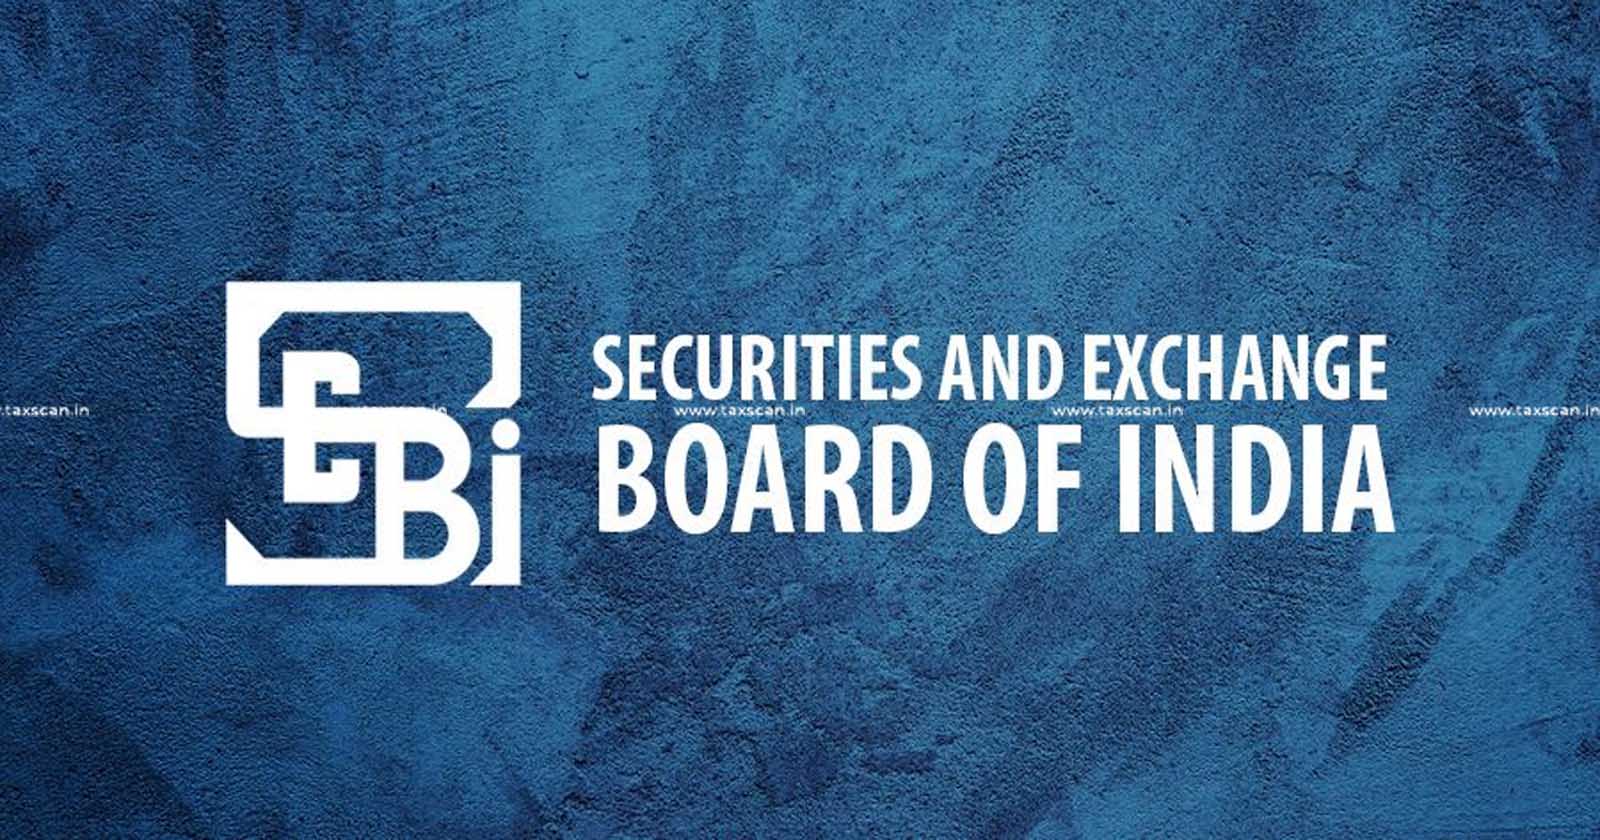 SEBI notifies amendment of SEBI - Issue and Listing of Non - Convertible Securities Regulations - Inserts new Chapters and Schedule - TAXSCAN